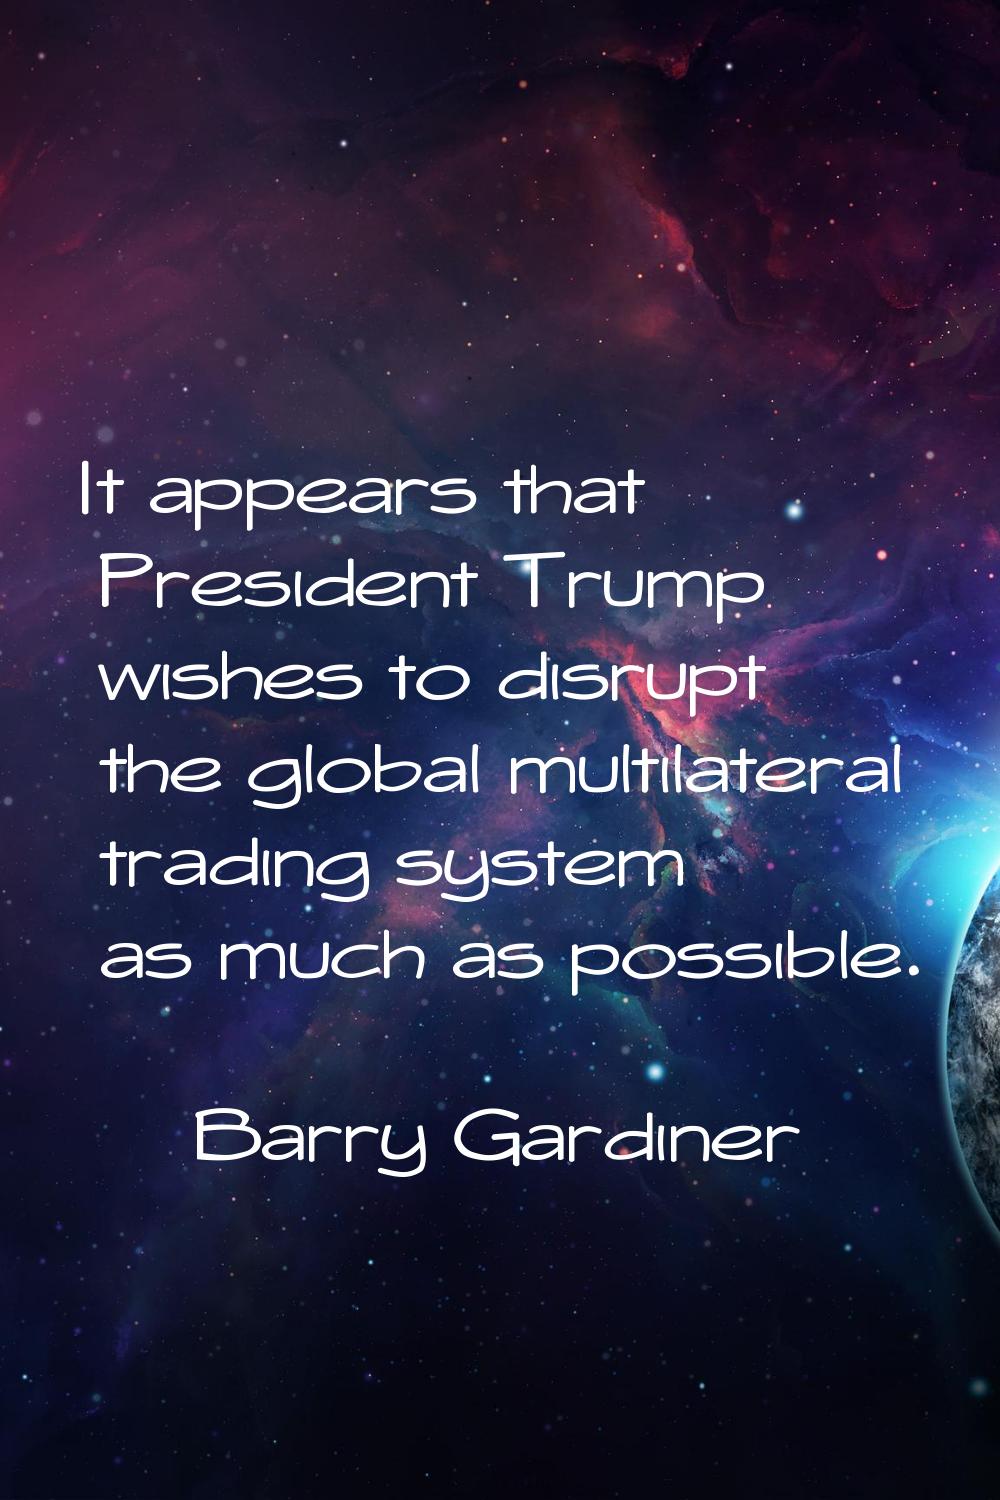 It appears that President Trump wishes to disrupt the global multilateral trading system as much as